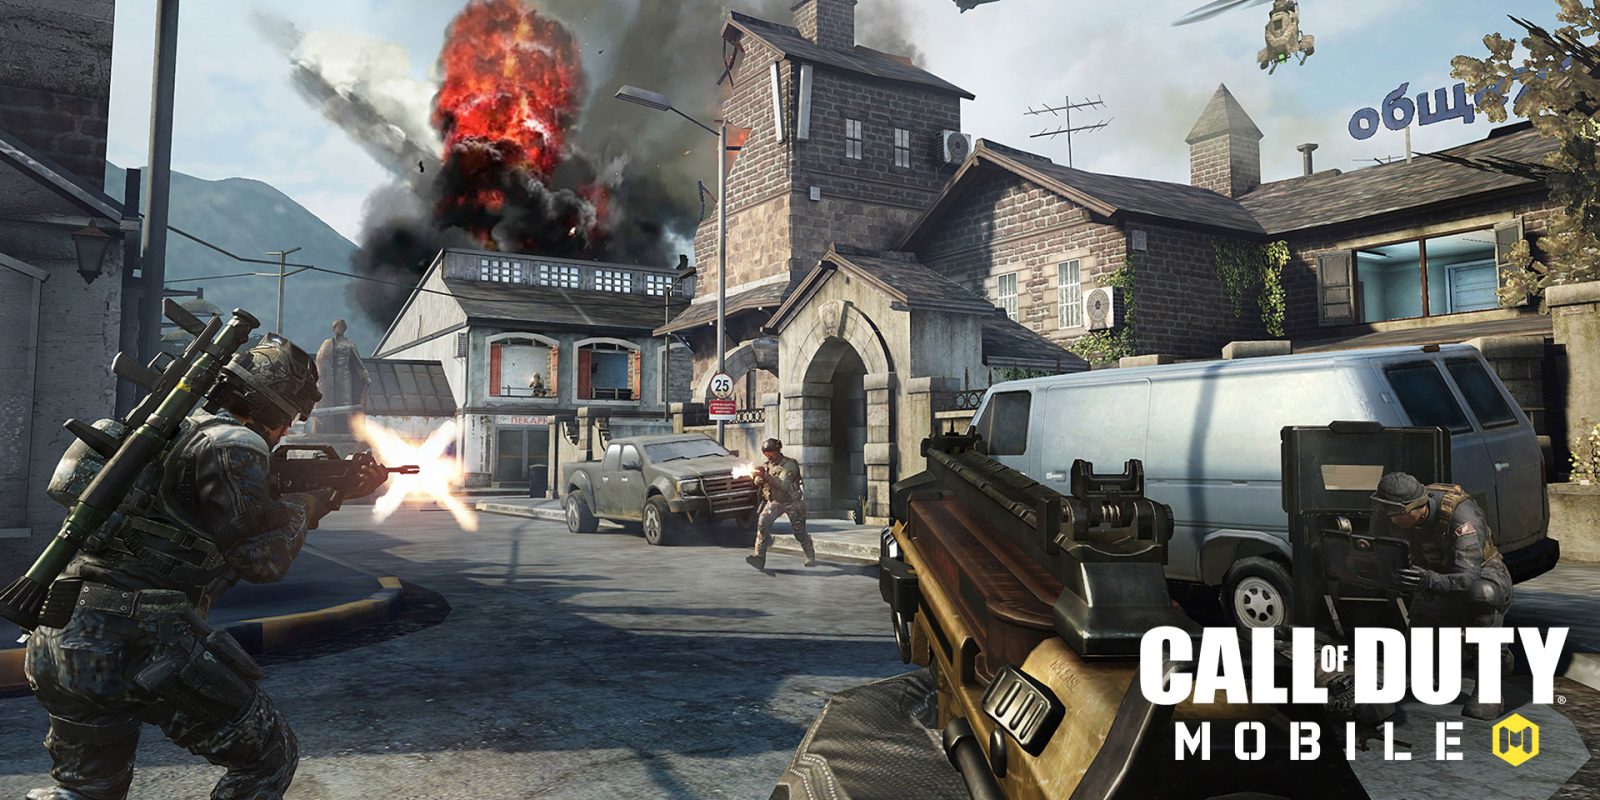 When will Call of Duty Mobile be released globally? | Dot ... - 